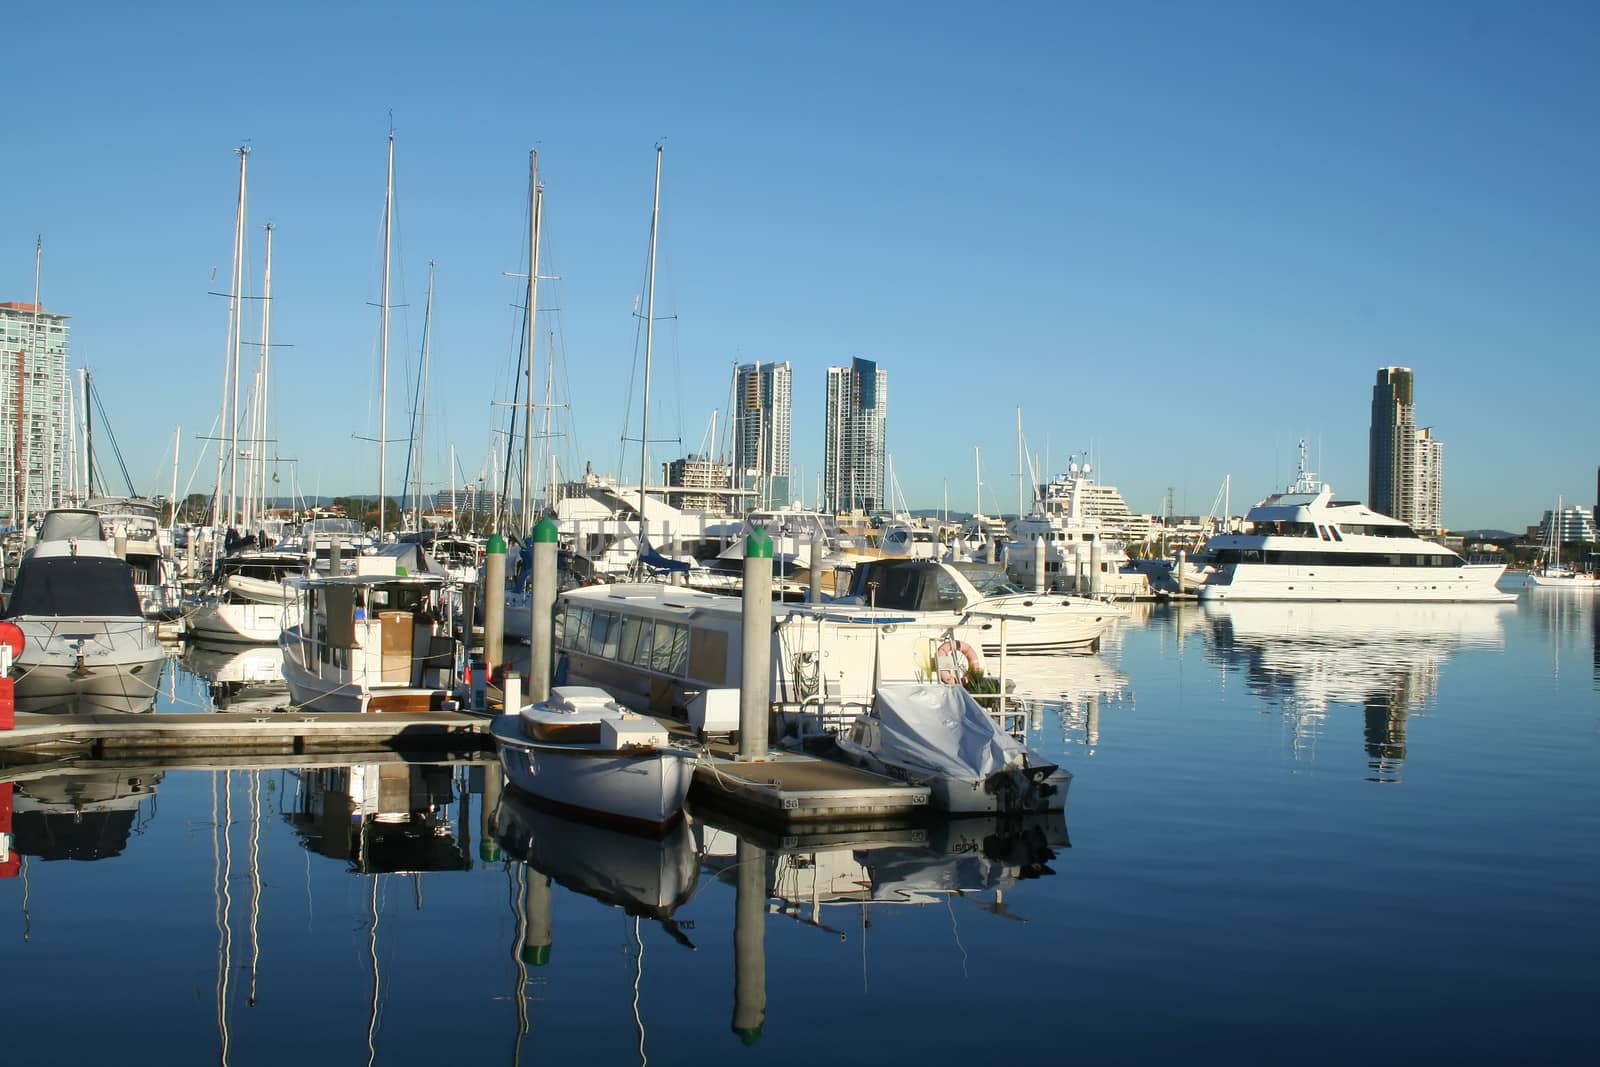 Southport Marina on the Gold Coast Australia just after sunrise with Southport in the background.